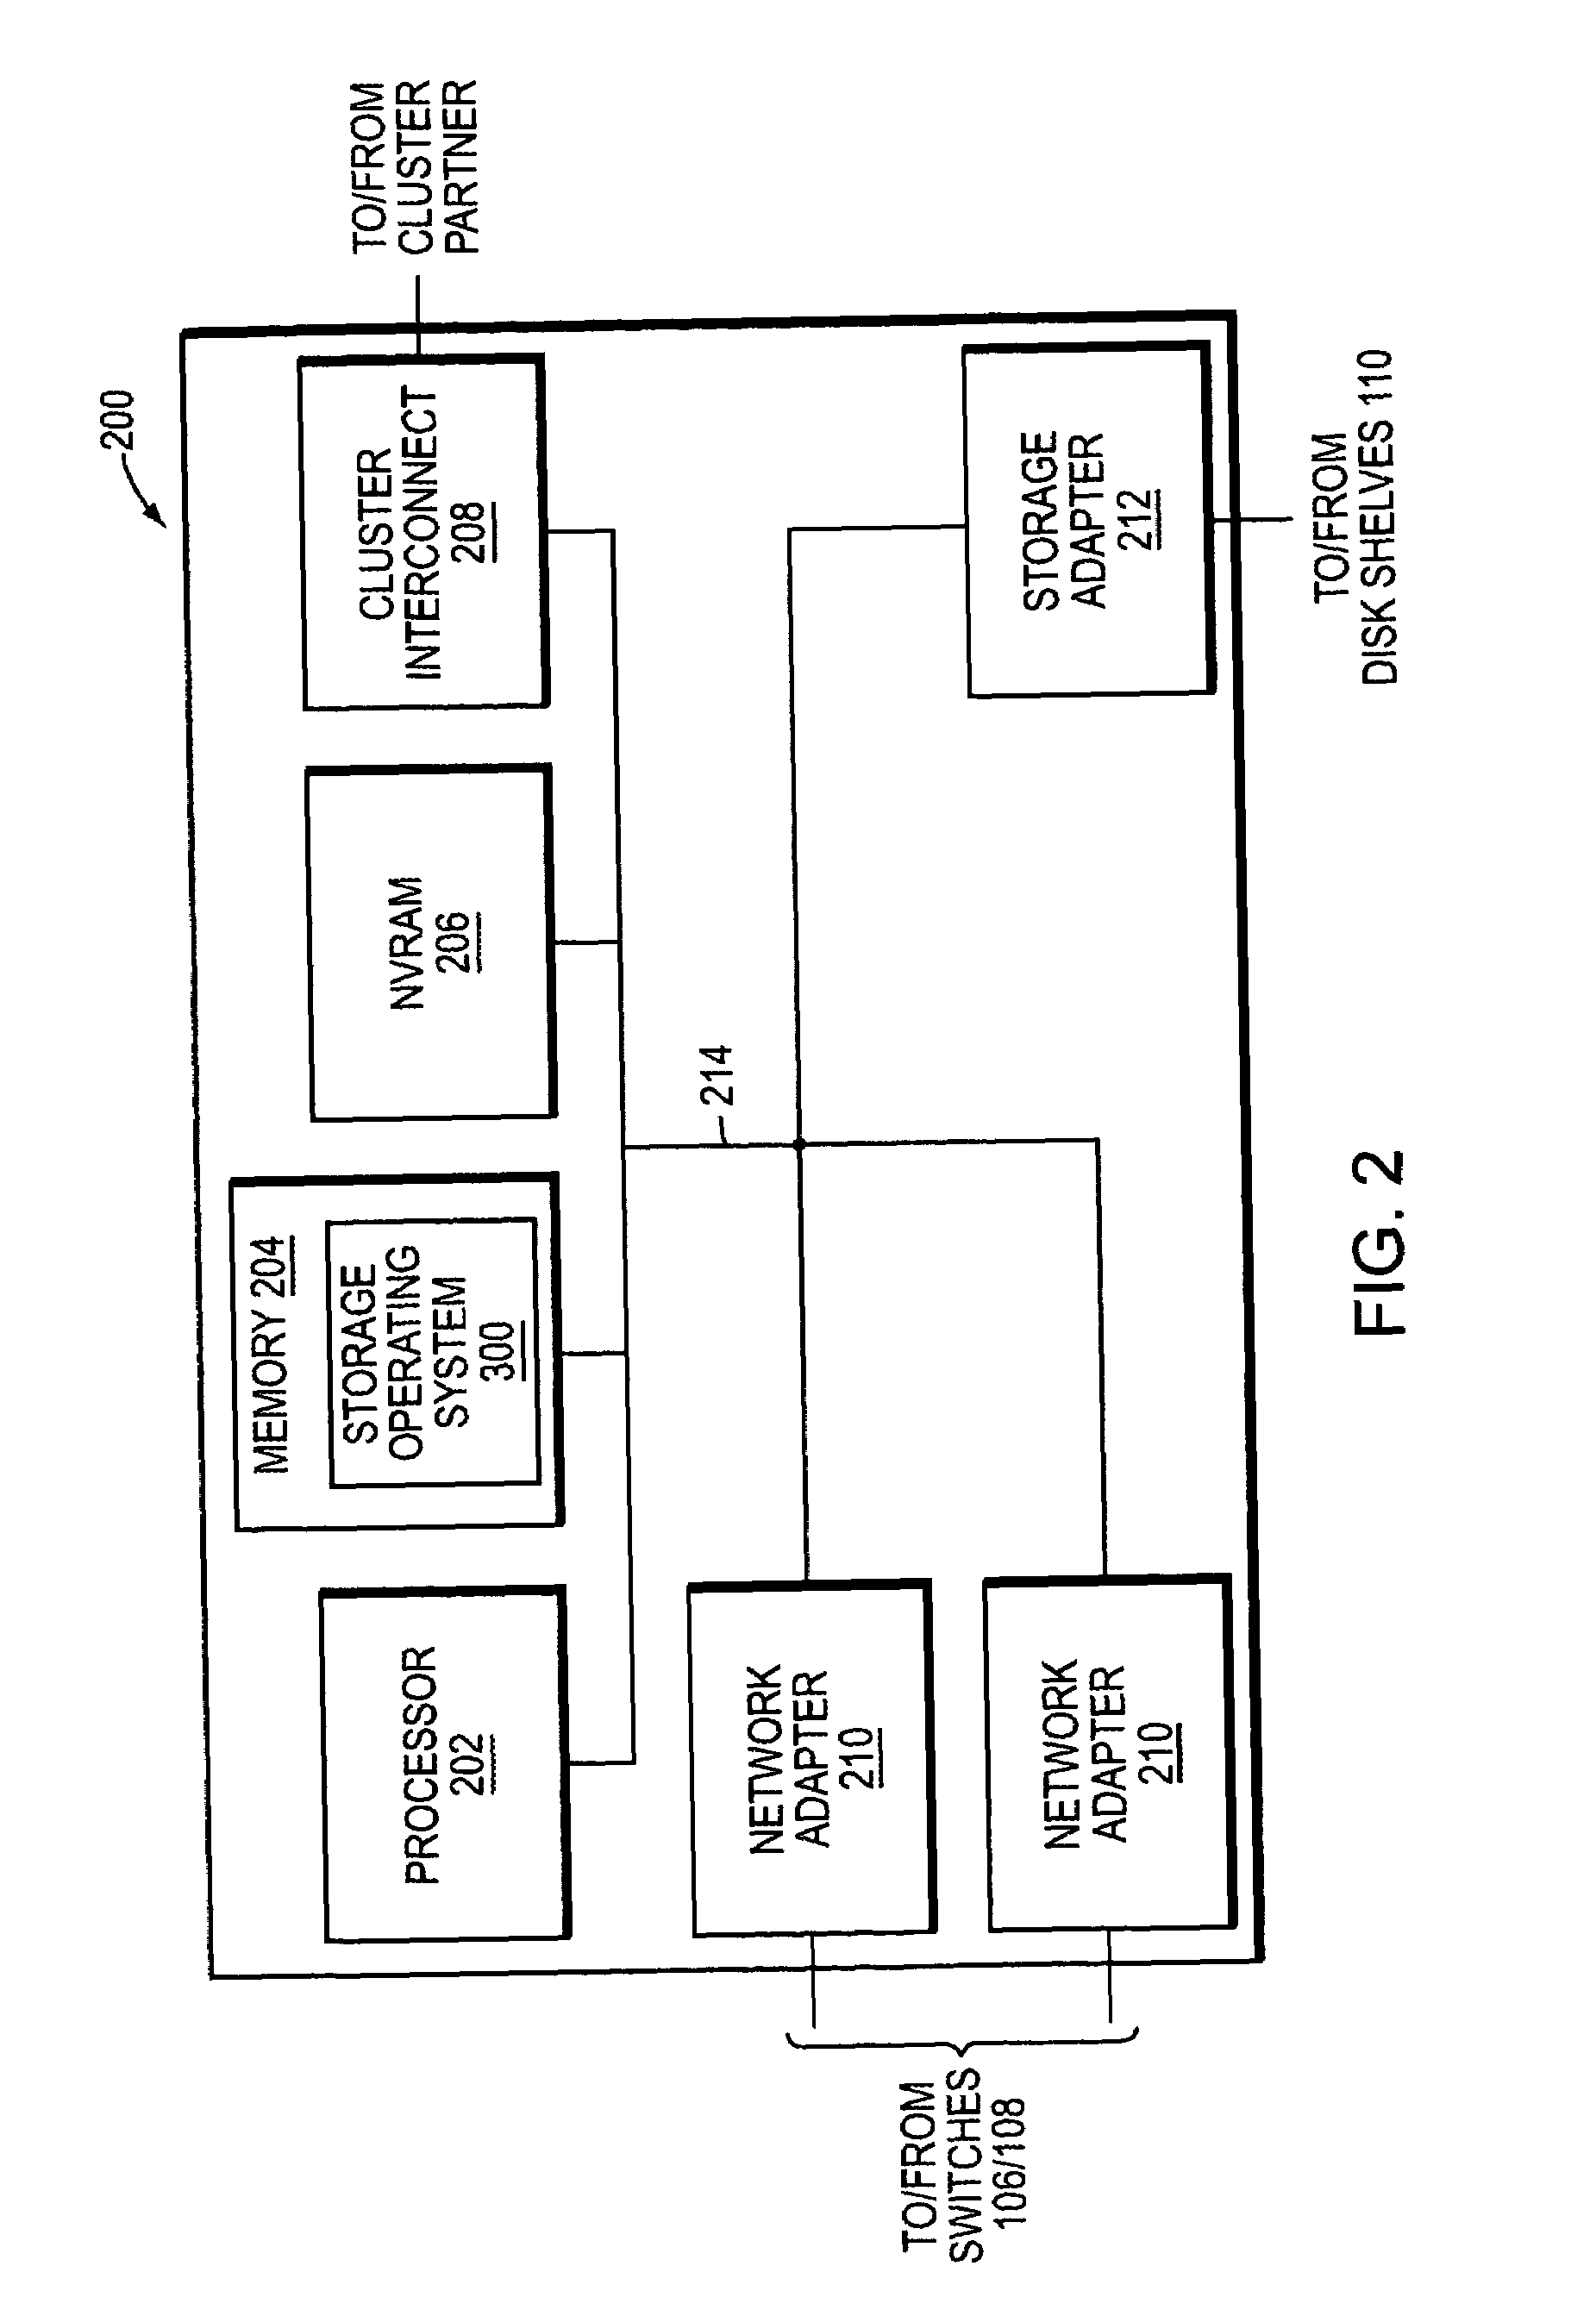 System and method for clustered failover without network support